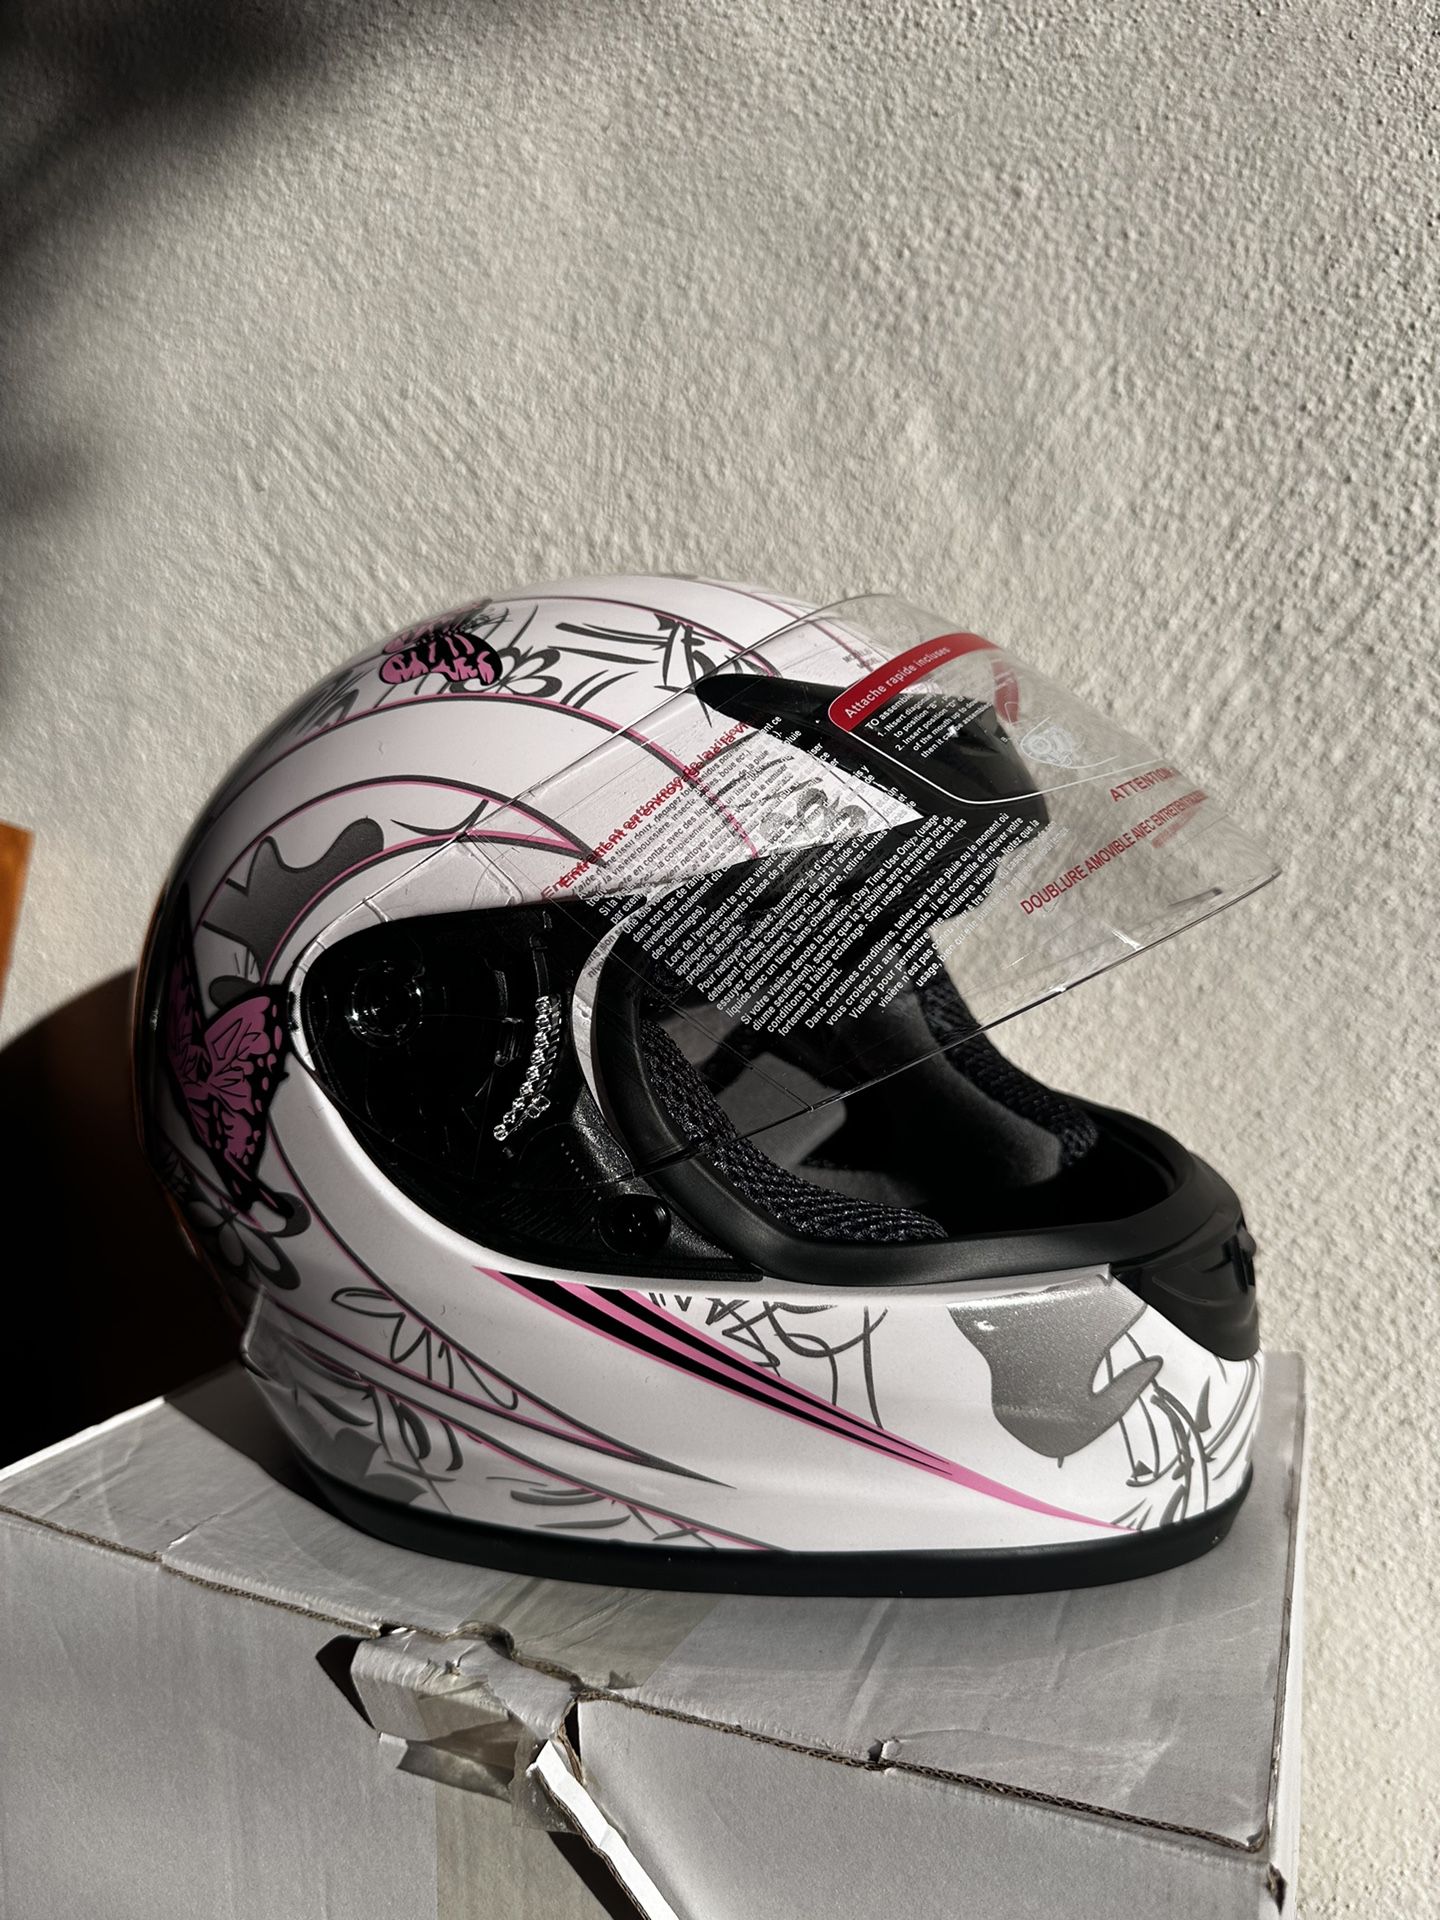 TCMT HY 901 DOT  OFF WHITE Pink Butterfly Full Face Helmet  WOMENS Size XL